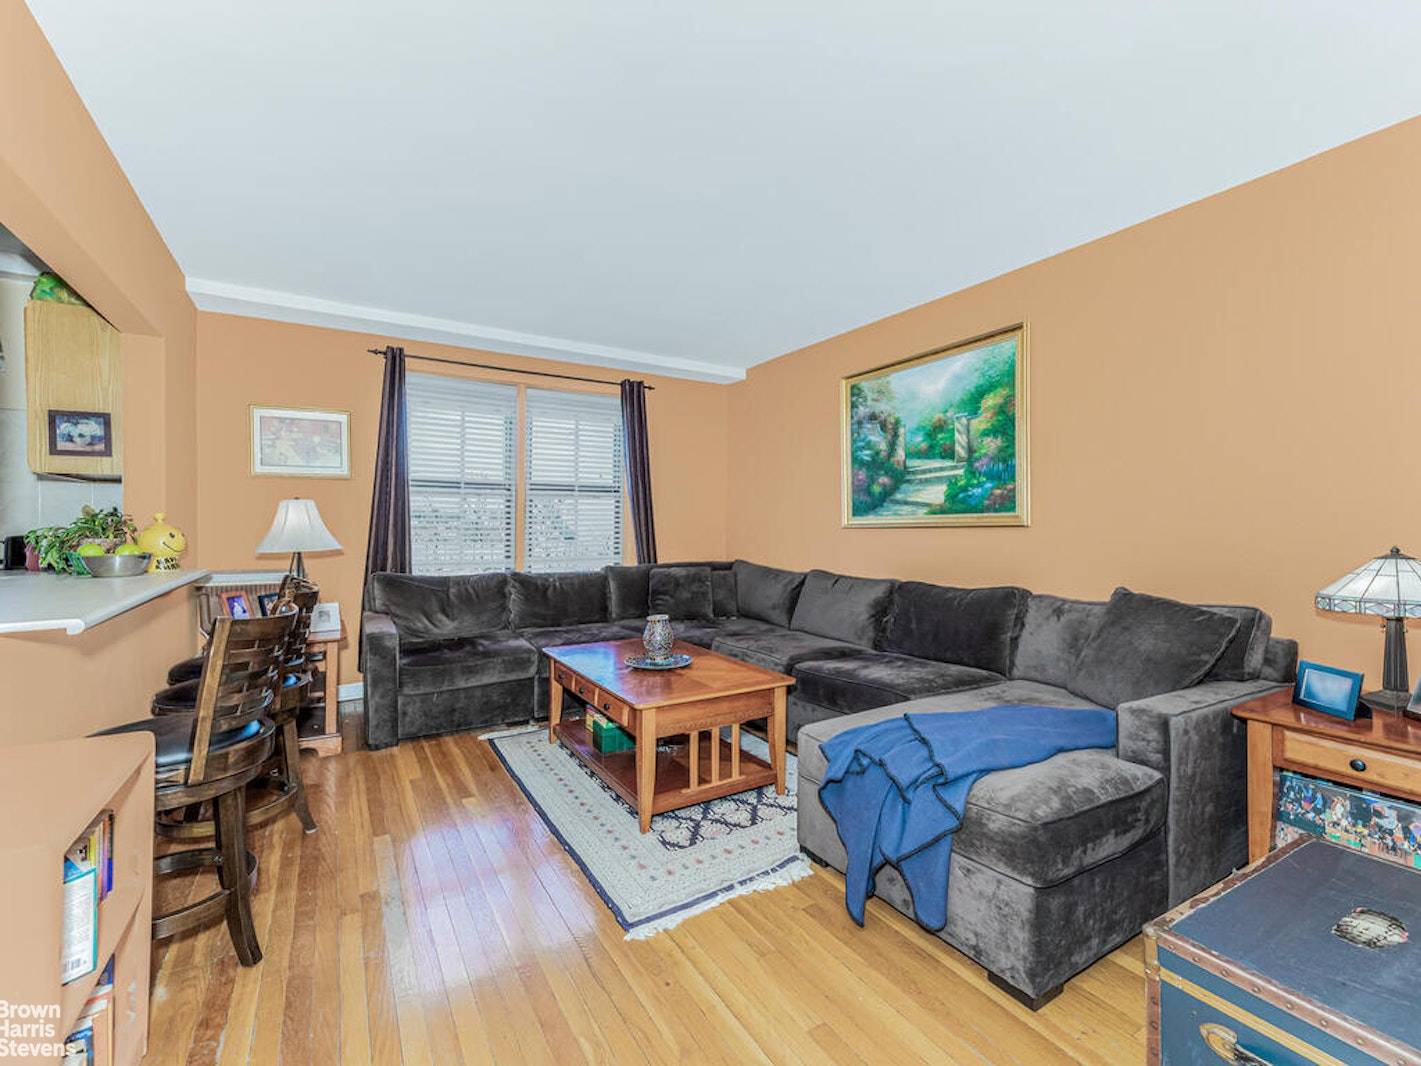 This is a real deal for this spacious real 2 Bedroom located in Central Riverdale, close to the 1 Train, shops and restaurants.